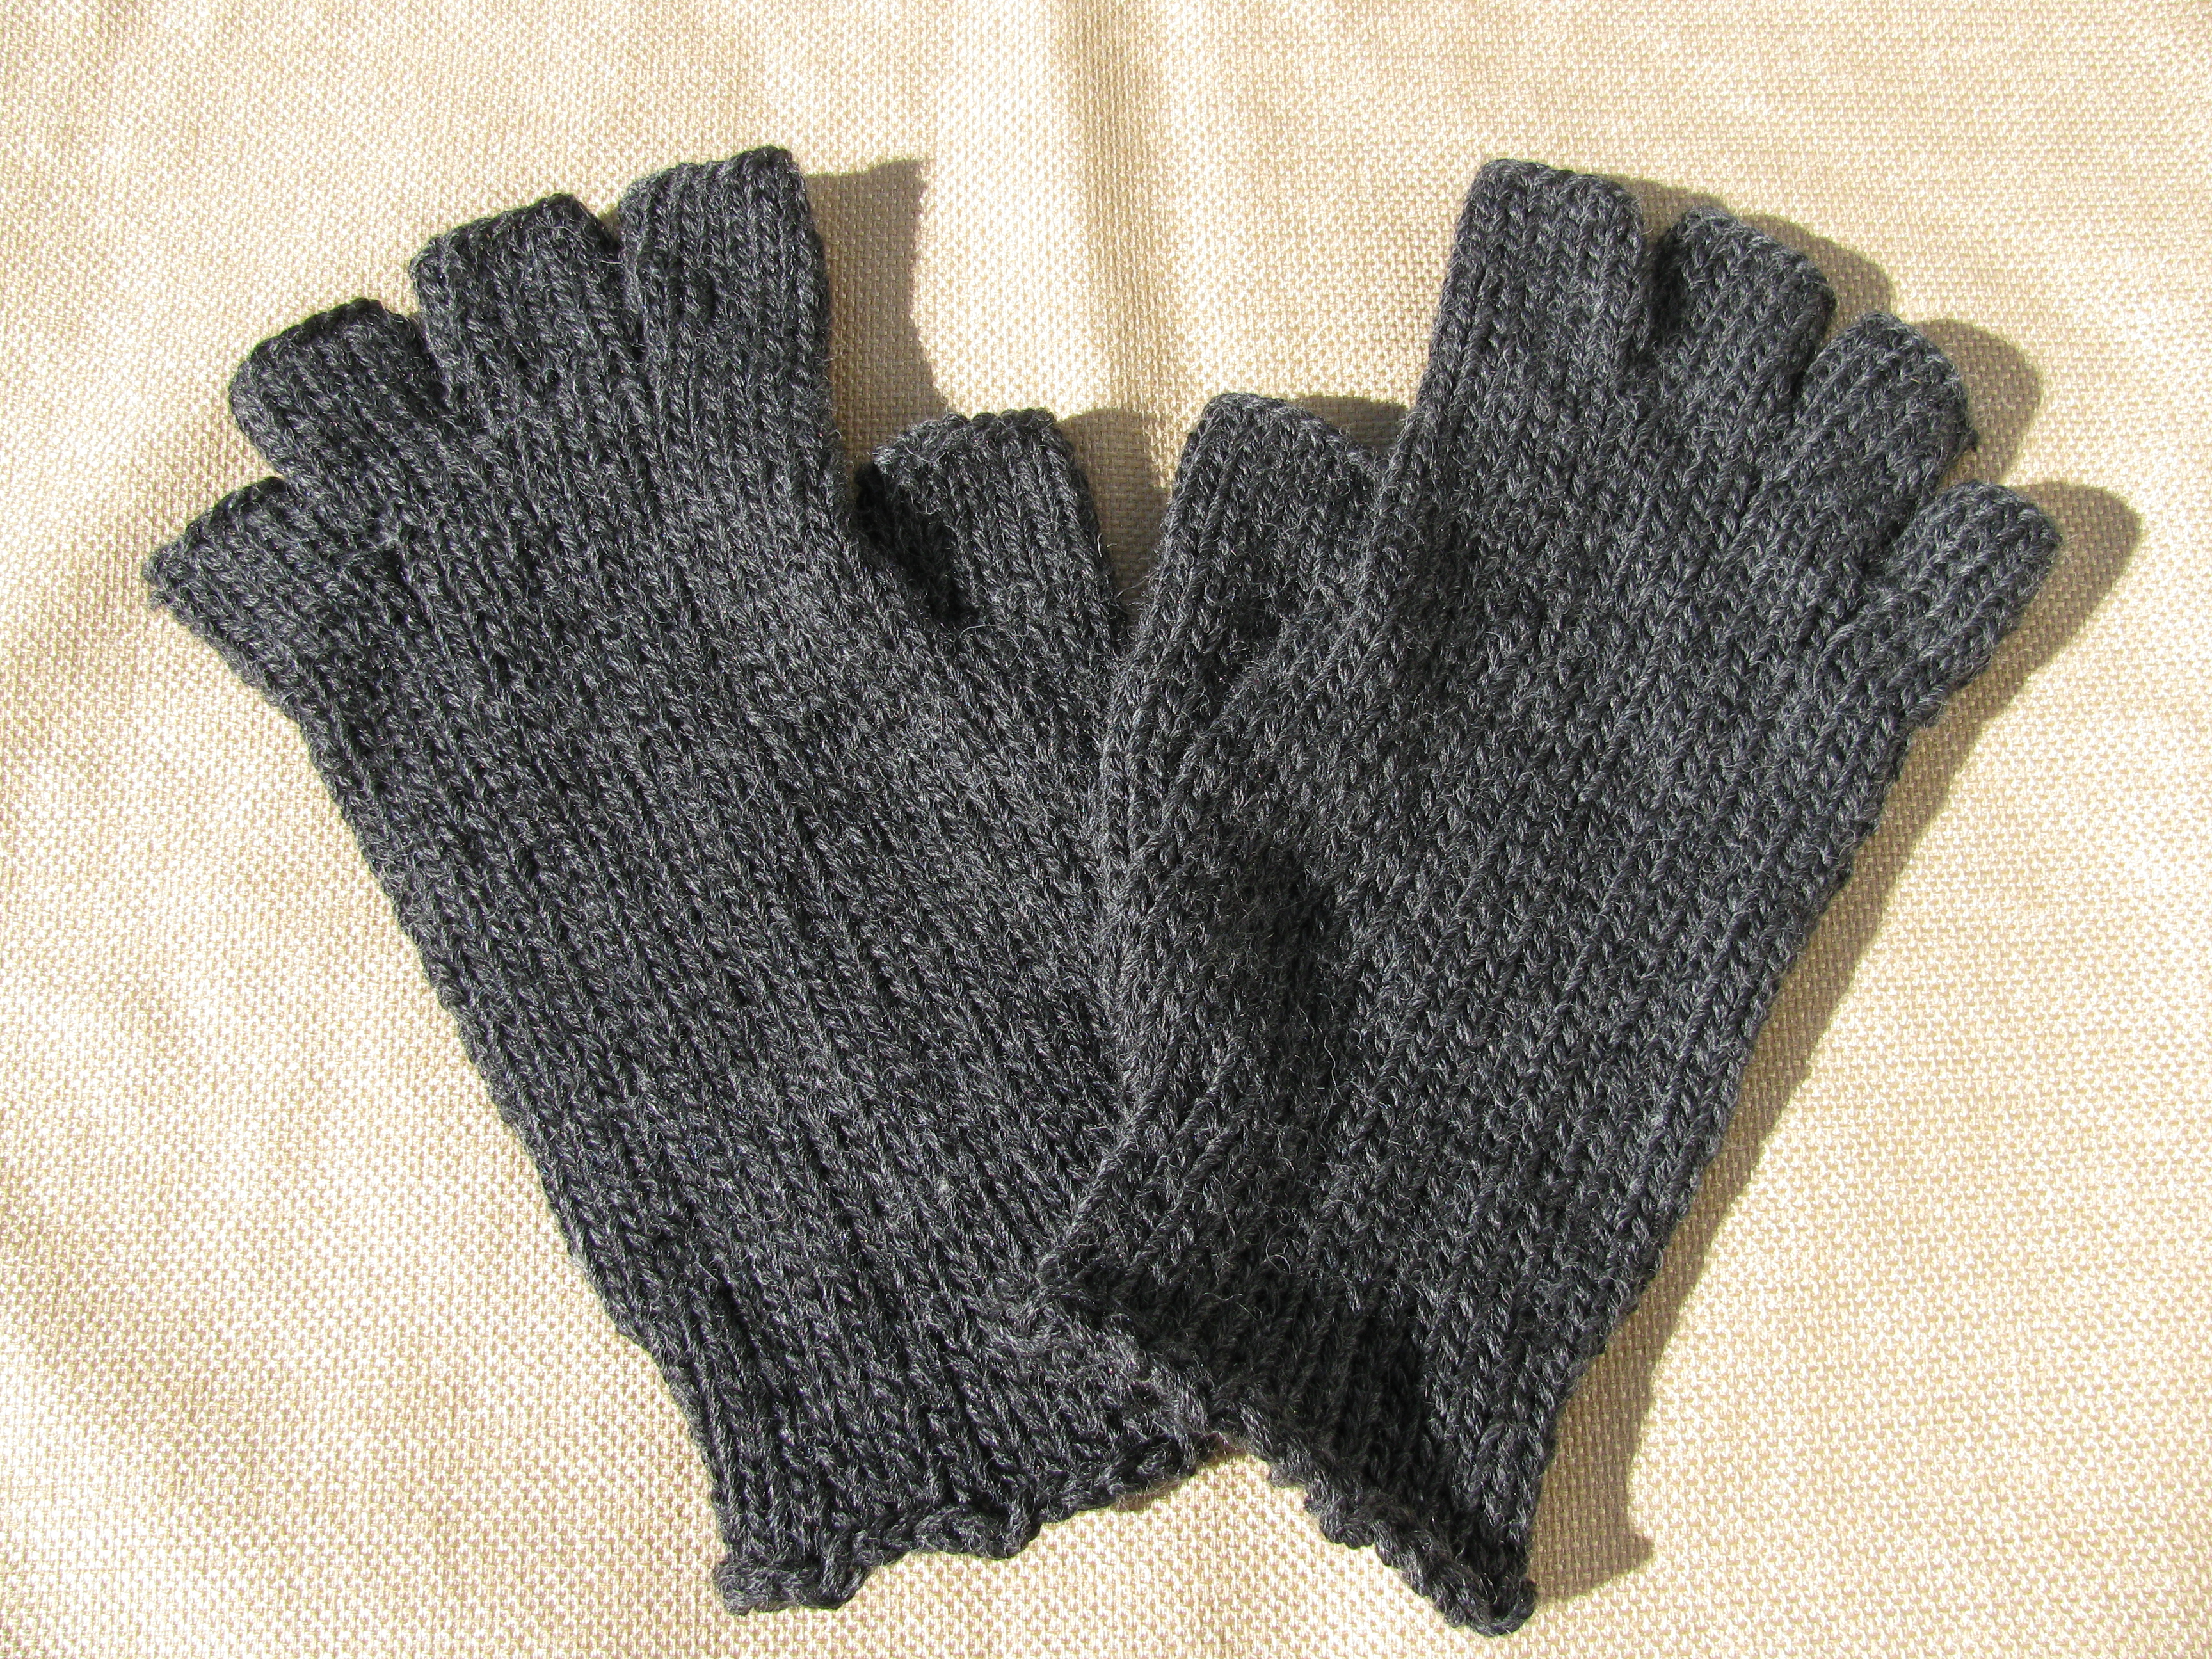 Mens Fingerless Gloves Ready To Ship On Luulla,How Much Do You Tip Movers For 2 Hours